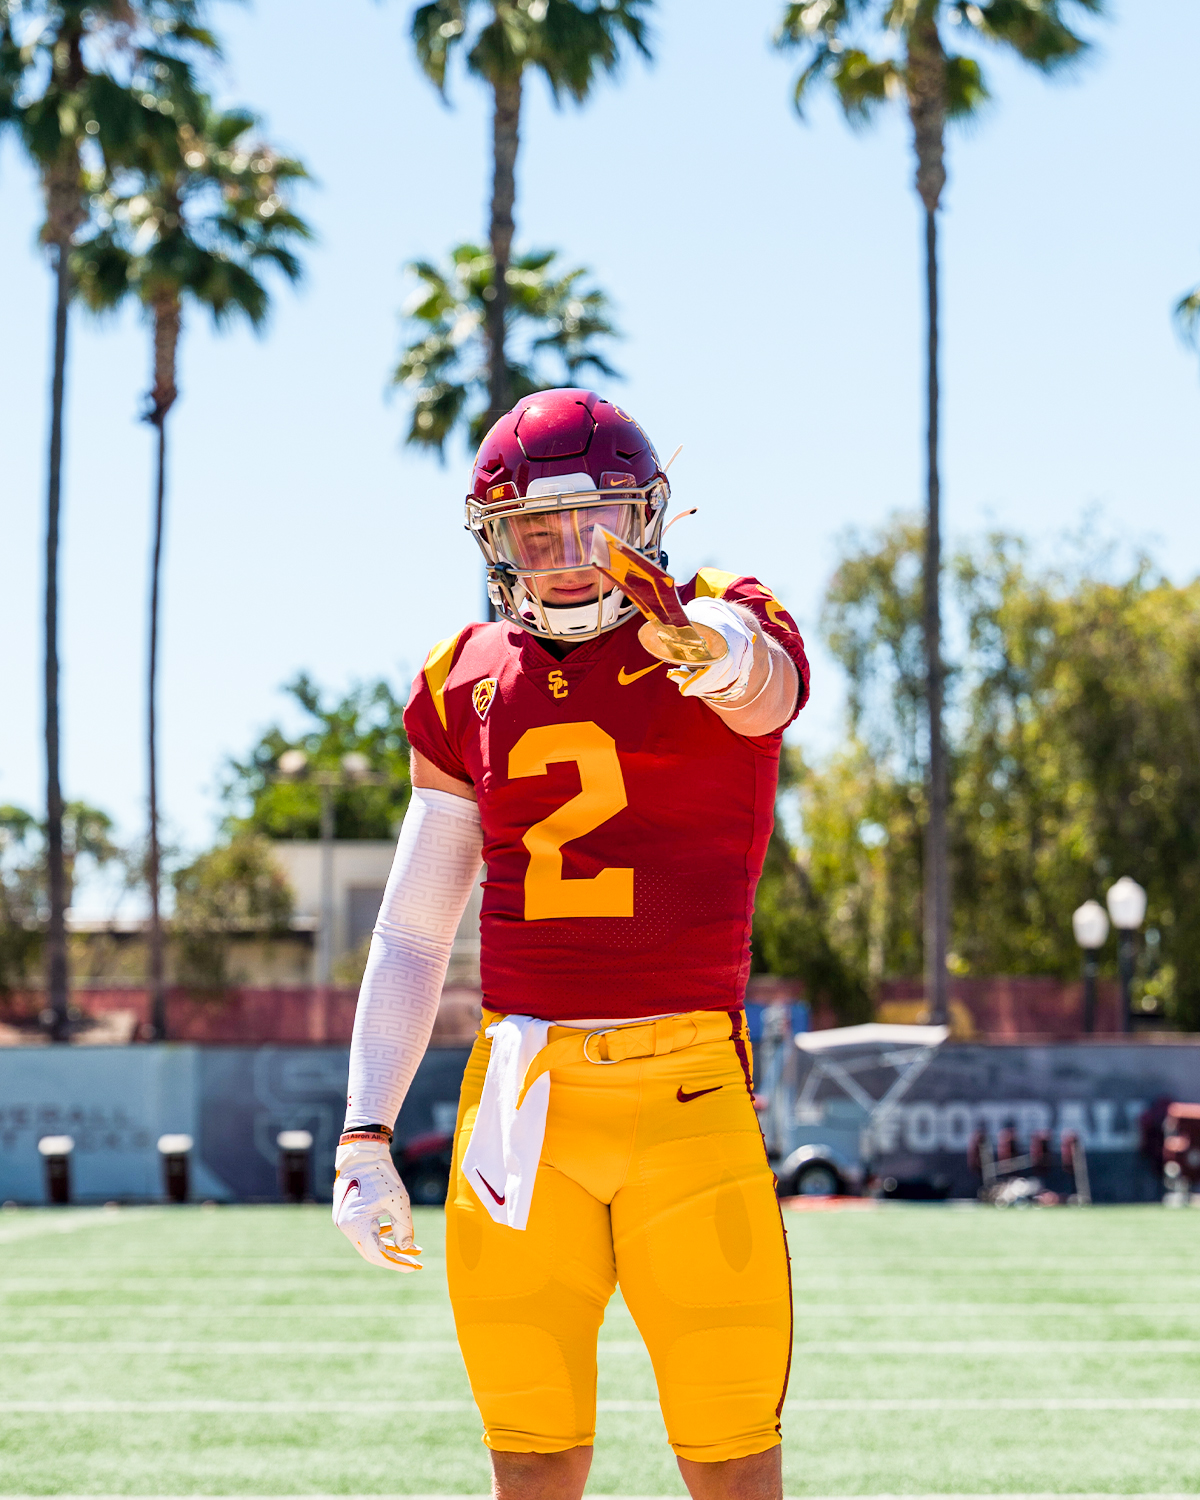 USC Football ✌️ on X: The squad hasn't stopped growing yet 👀 Introducing  even 𝙢𝙤𝙧𝙚 members to our growing Trojan Family! Welcome to the  family!✌️ ✍️ Mason Cobb / @Cobb